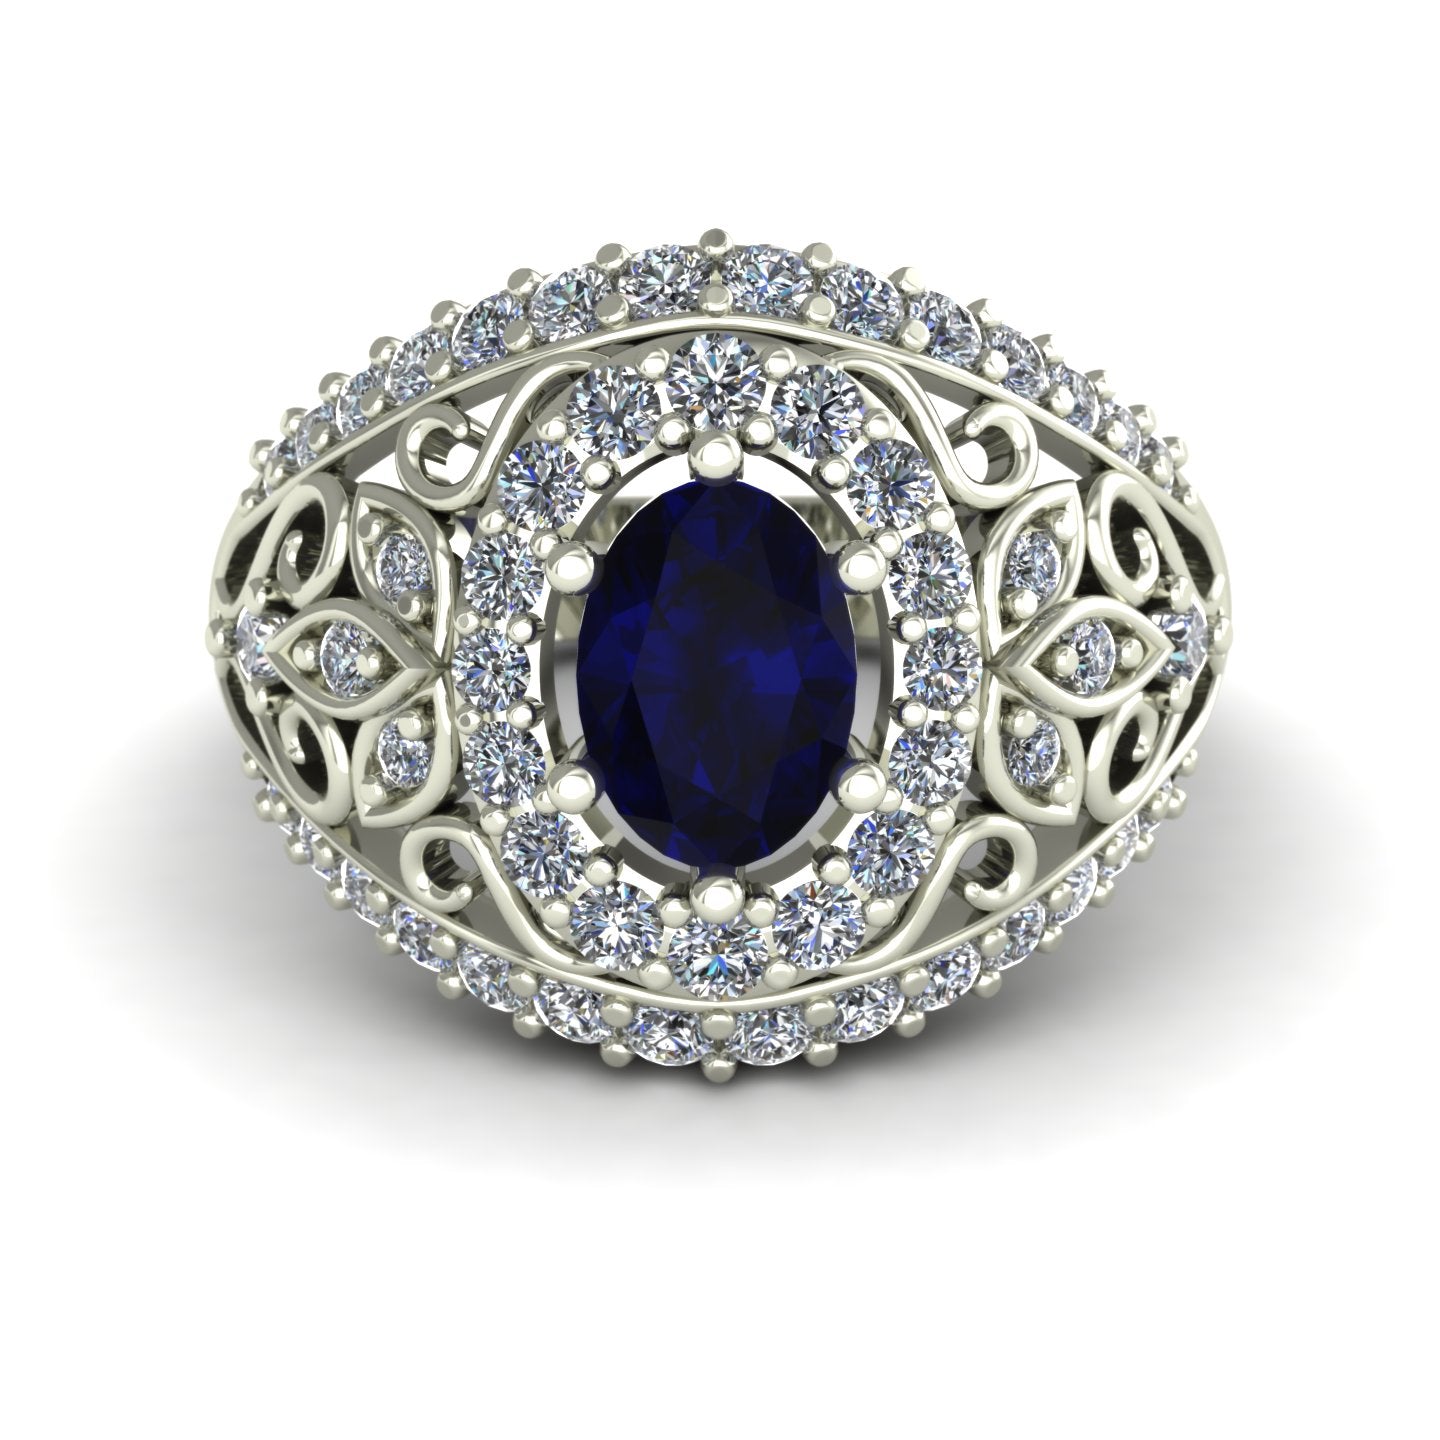 oval blue sapphire and diamond dome ring in 14k white gold - Charles Babb Designs - top view